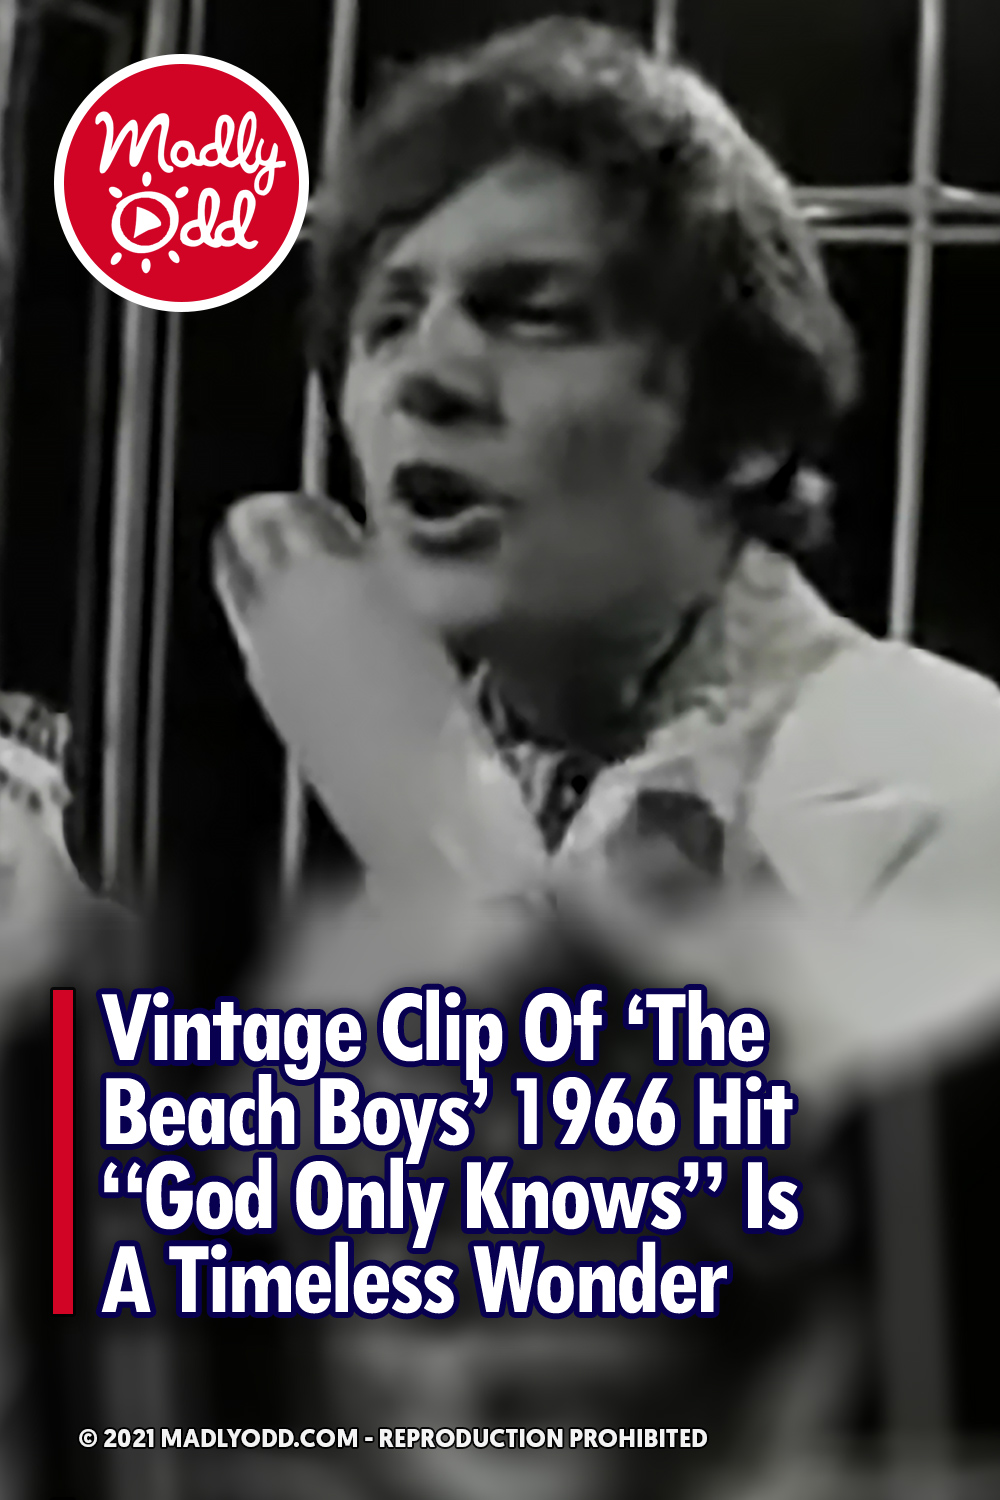 Vintage Clip Of ‘The Beach Boys’ 1966 Hit “God Only Knows” Is A Timeless Wonder